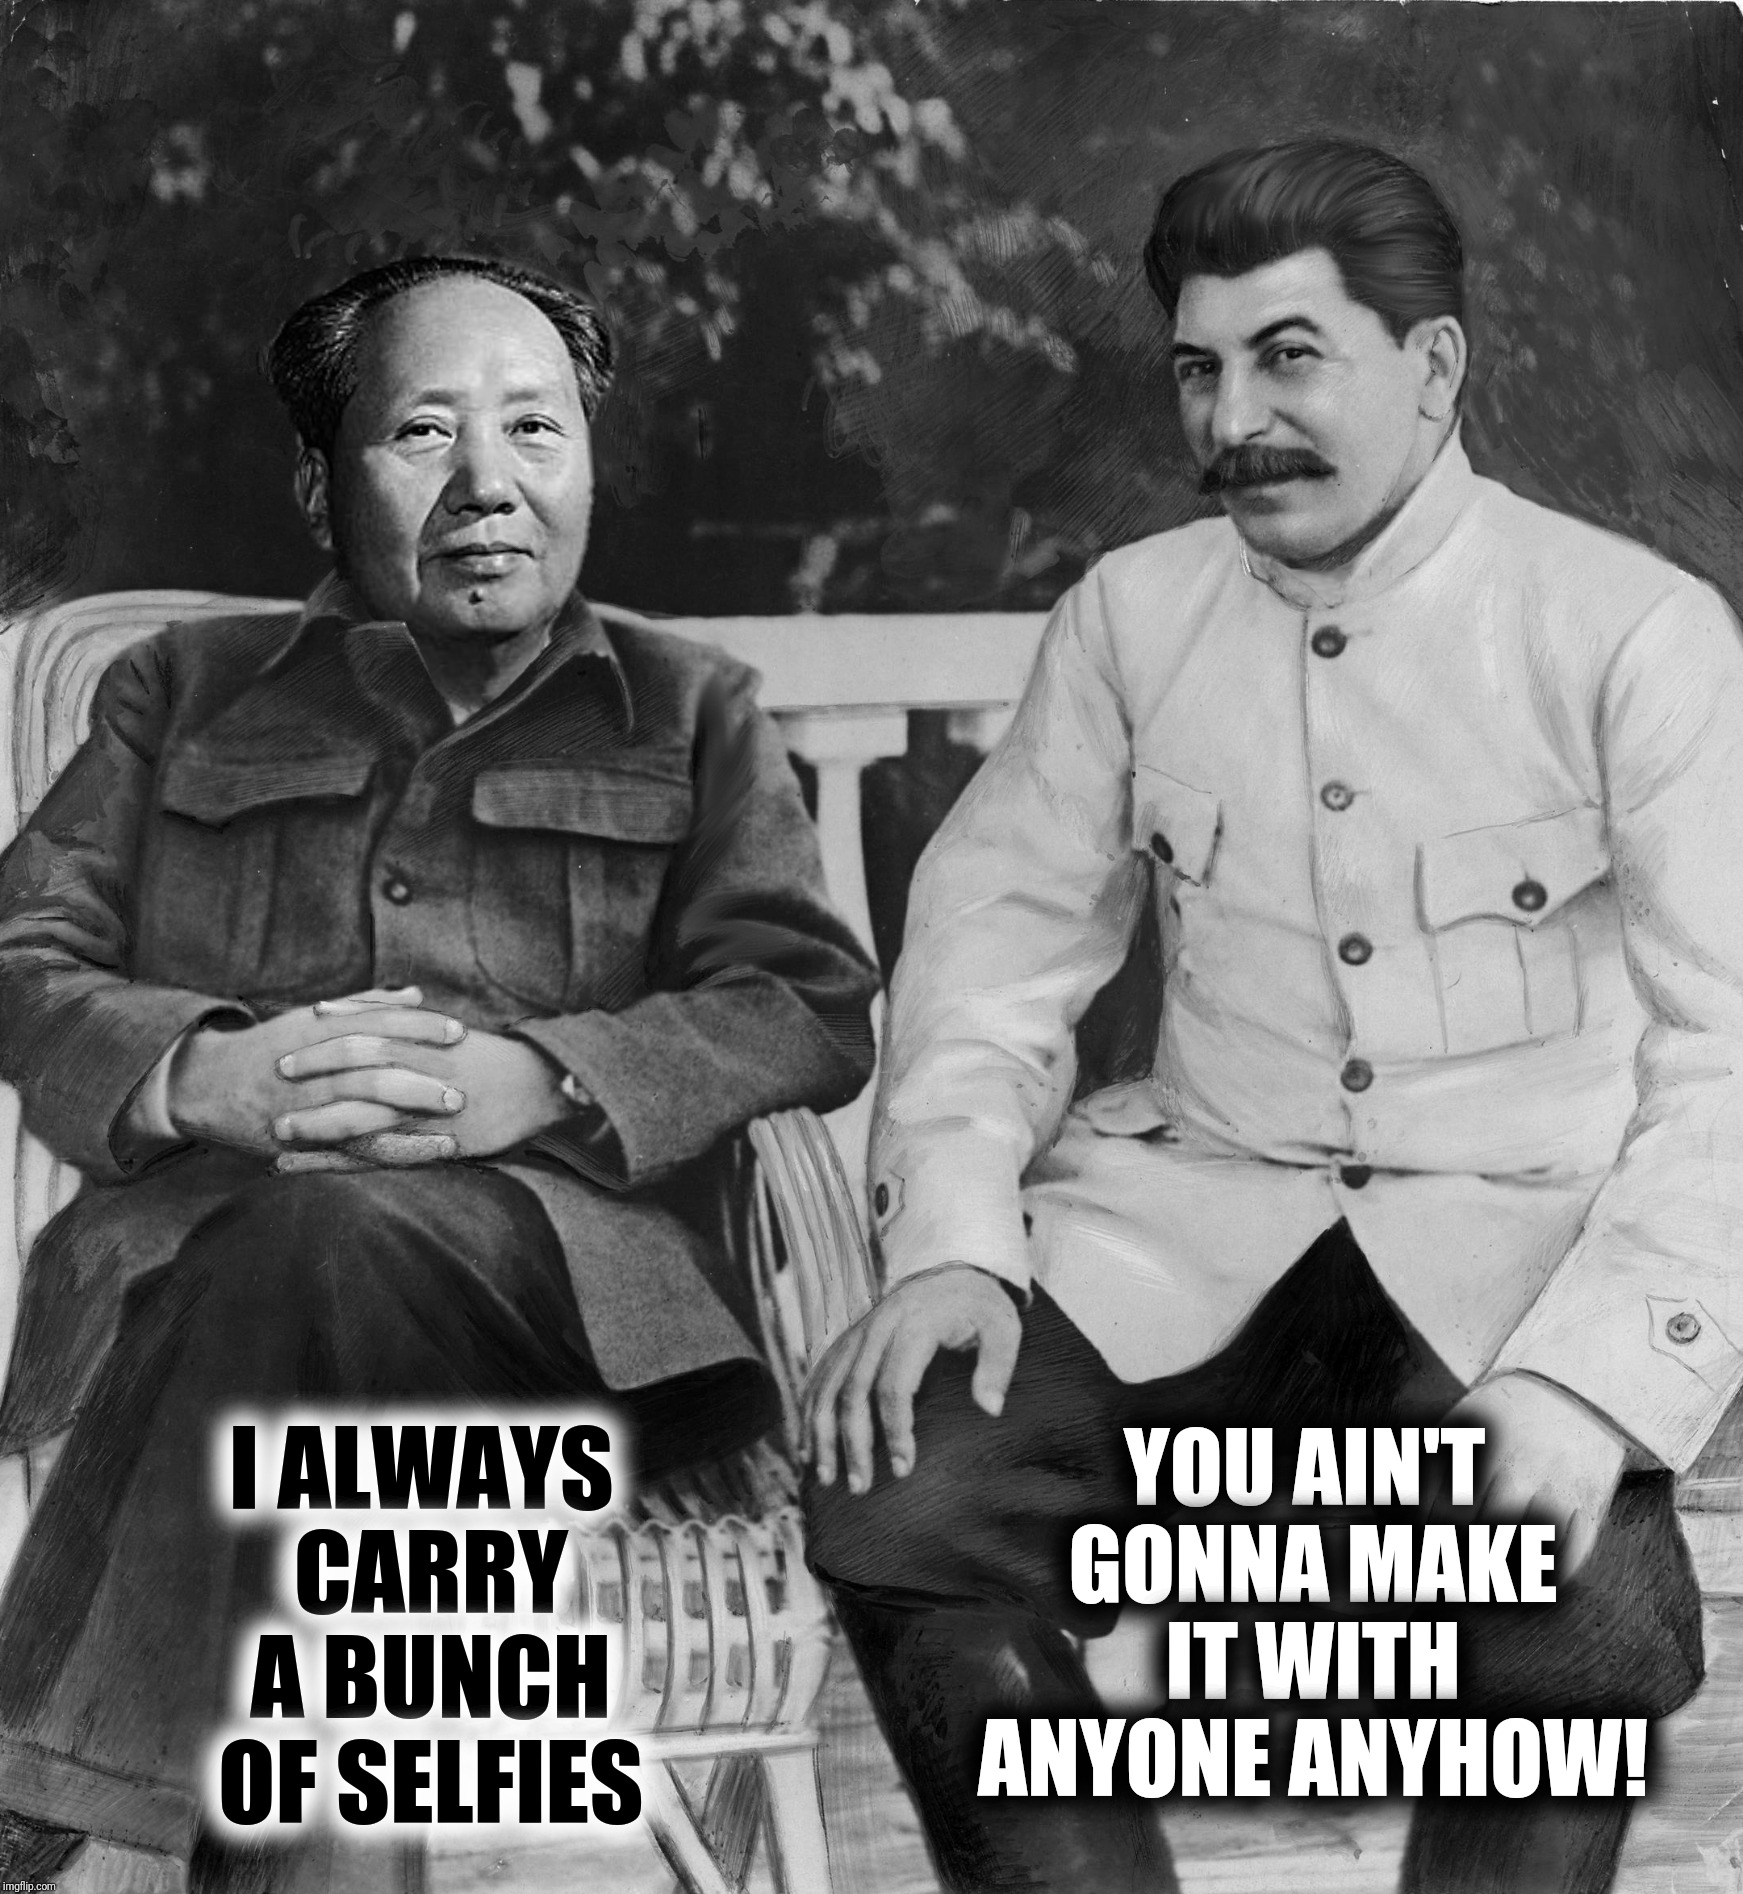 We all want to change the world | YOU AIN'T GONNA MAKE IT WITH ANYONE ANYHOW! I ALWAYS CARRY A BUNCH OF SELFIES | image tagged in chairman mao,joseph stalin,the beatles,revolution | made w/ Imgflip meme maker